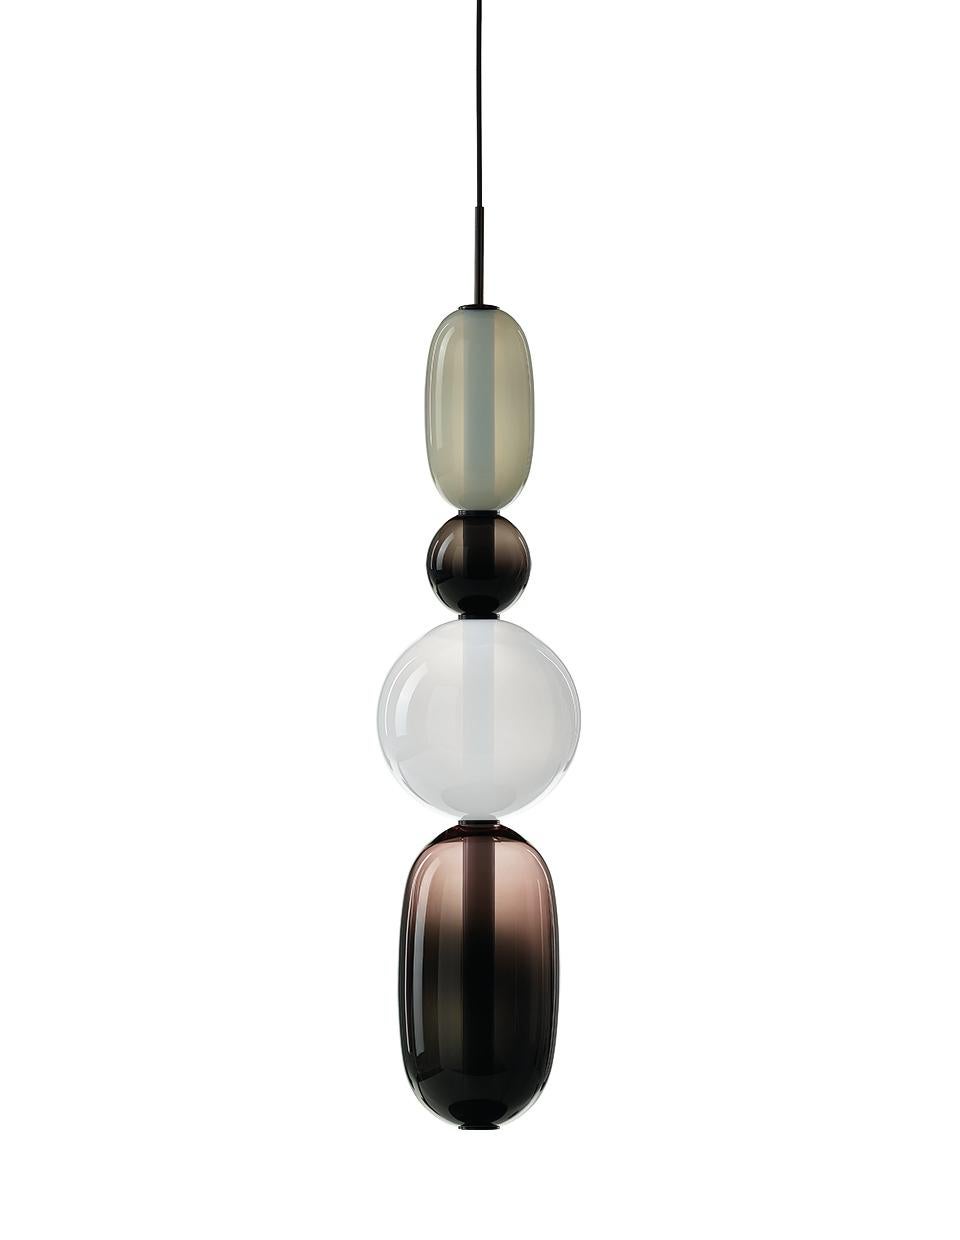 Contemporary blown crystal glass pendant - Pebbles by Boris Klimek for Bomma

Pebbles are reminders of exceptional moments or favorite places. Their diverse shapes and colors inspired BOMMA’s playful collection that invites you to express your